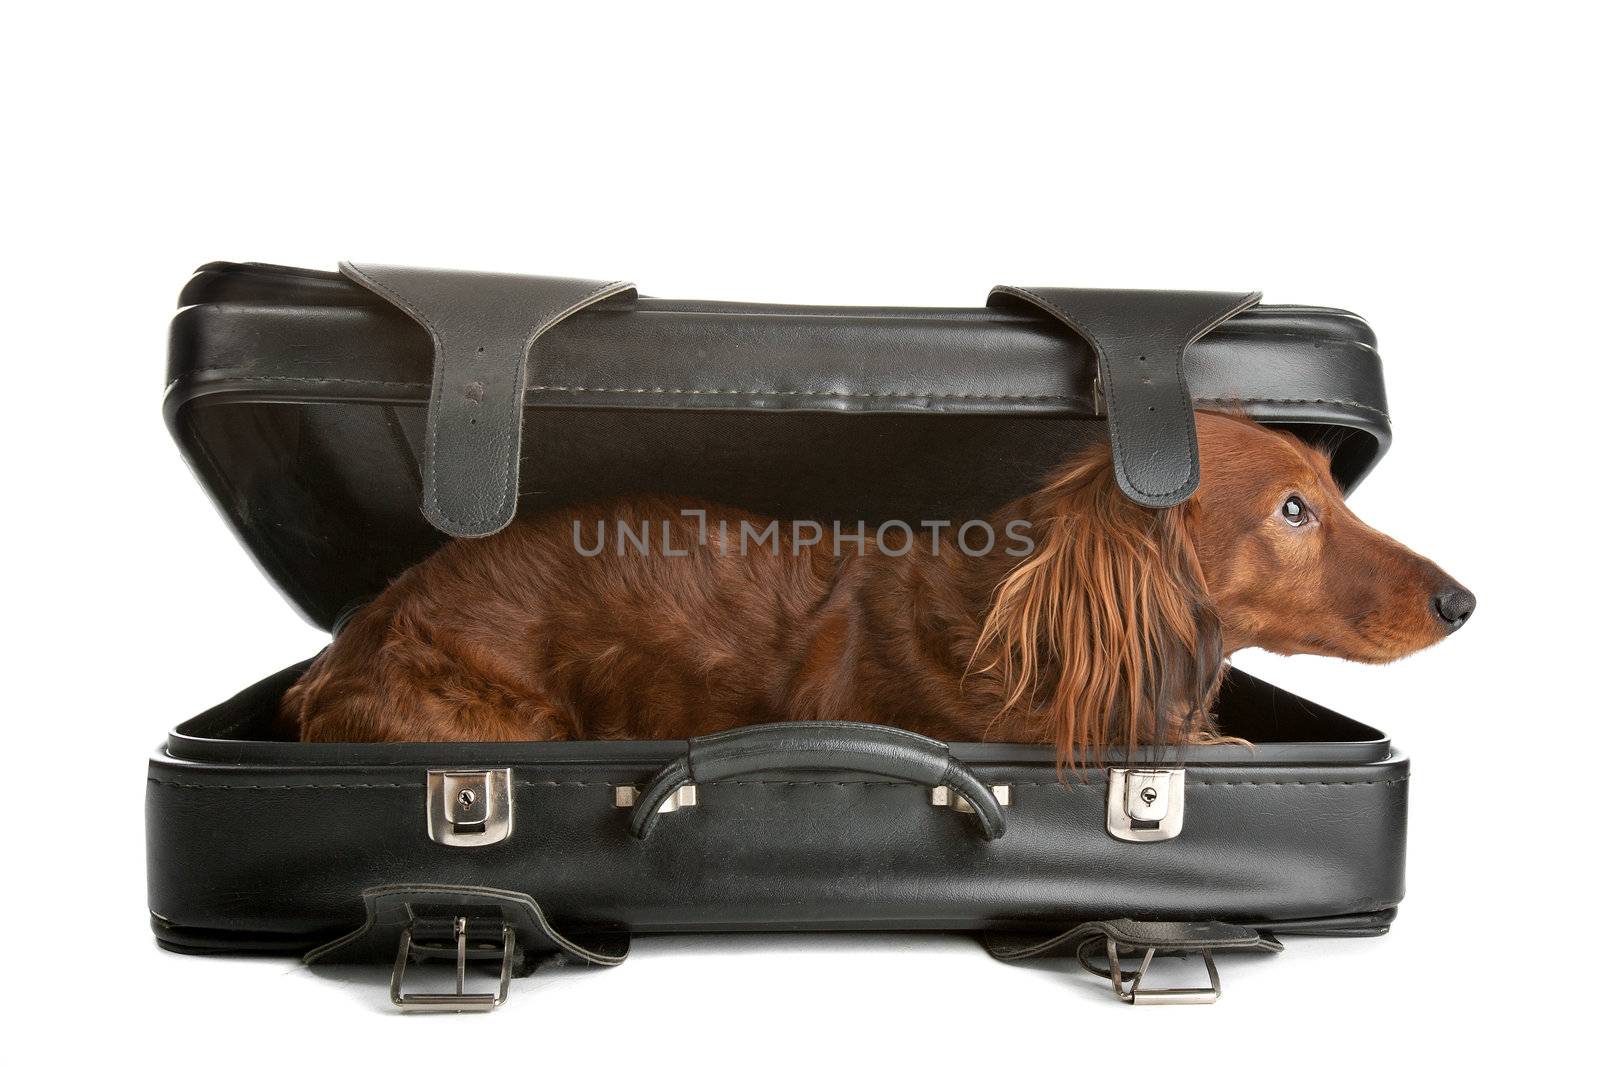 A delightful view of a small, naughty Dachshund dog playfully peering out from inside a black suitcase.